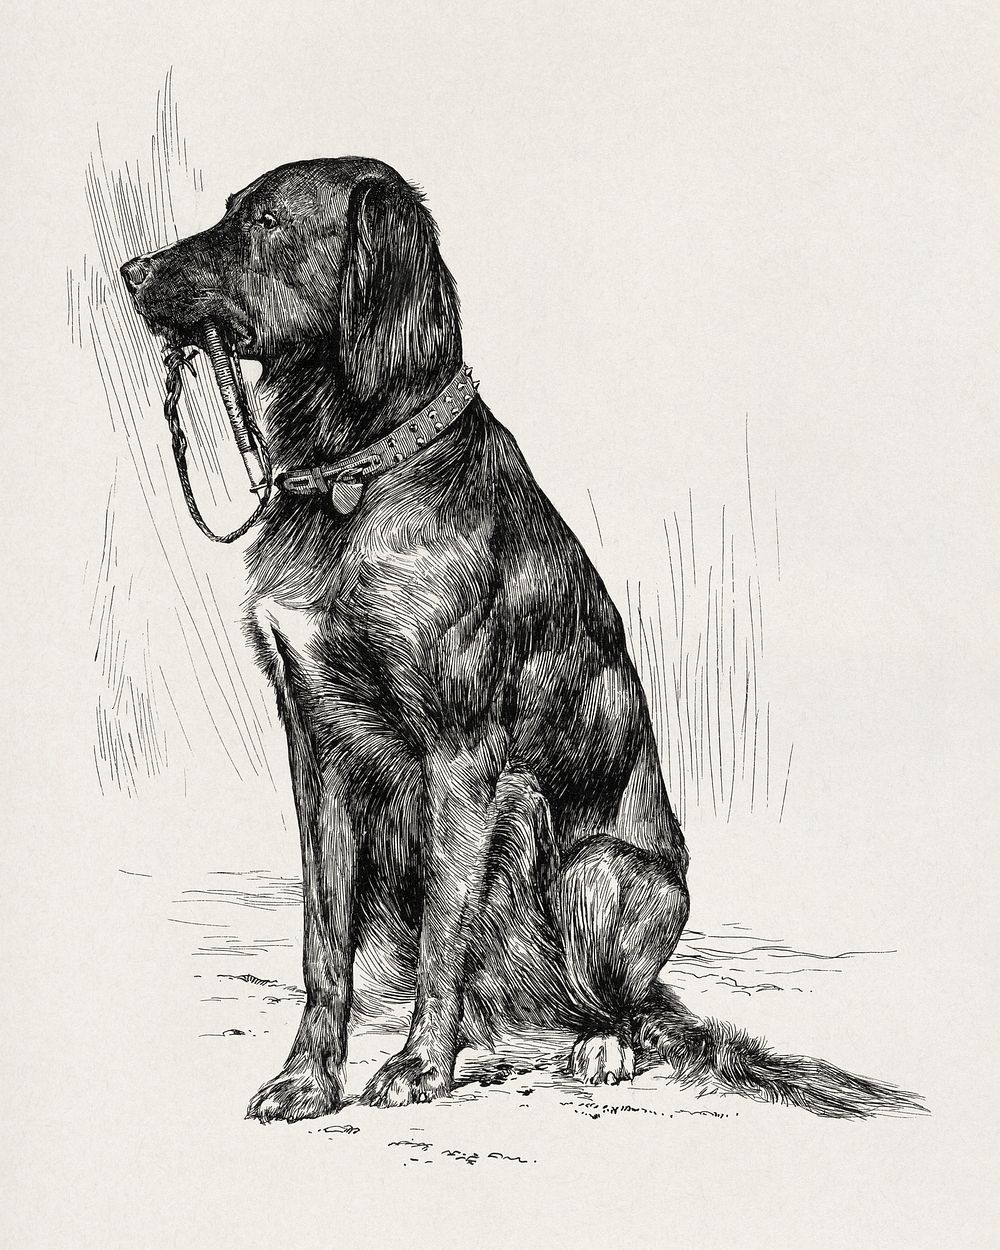 Aldrich's dog (1880s) aesthetic drawing by John Davis Hatch. Original public domain image from the National Gallery of Art.…